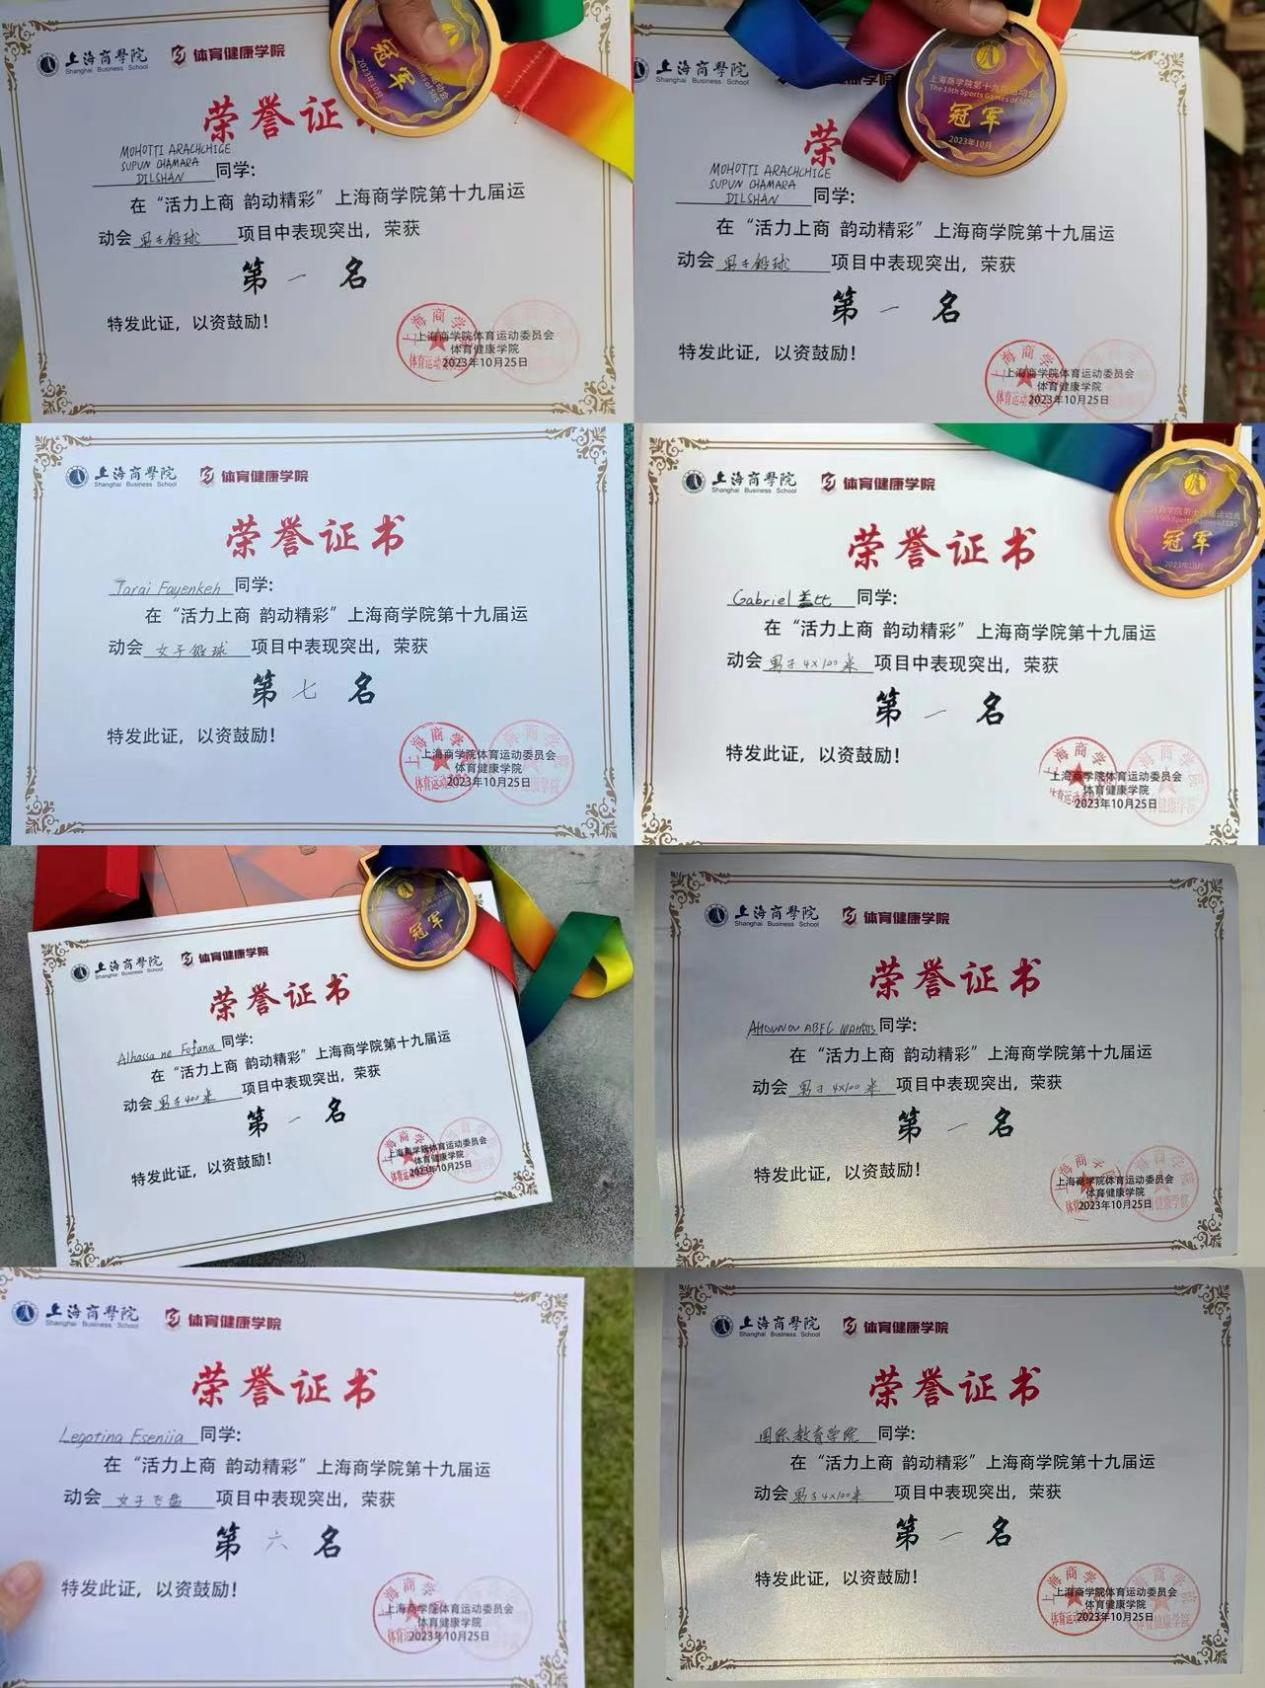 The award certificates of international students in the Games